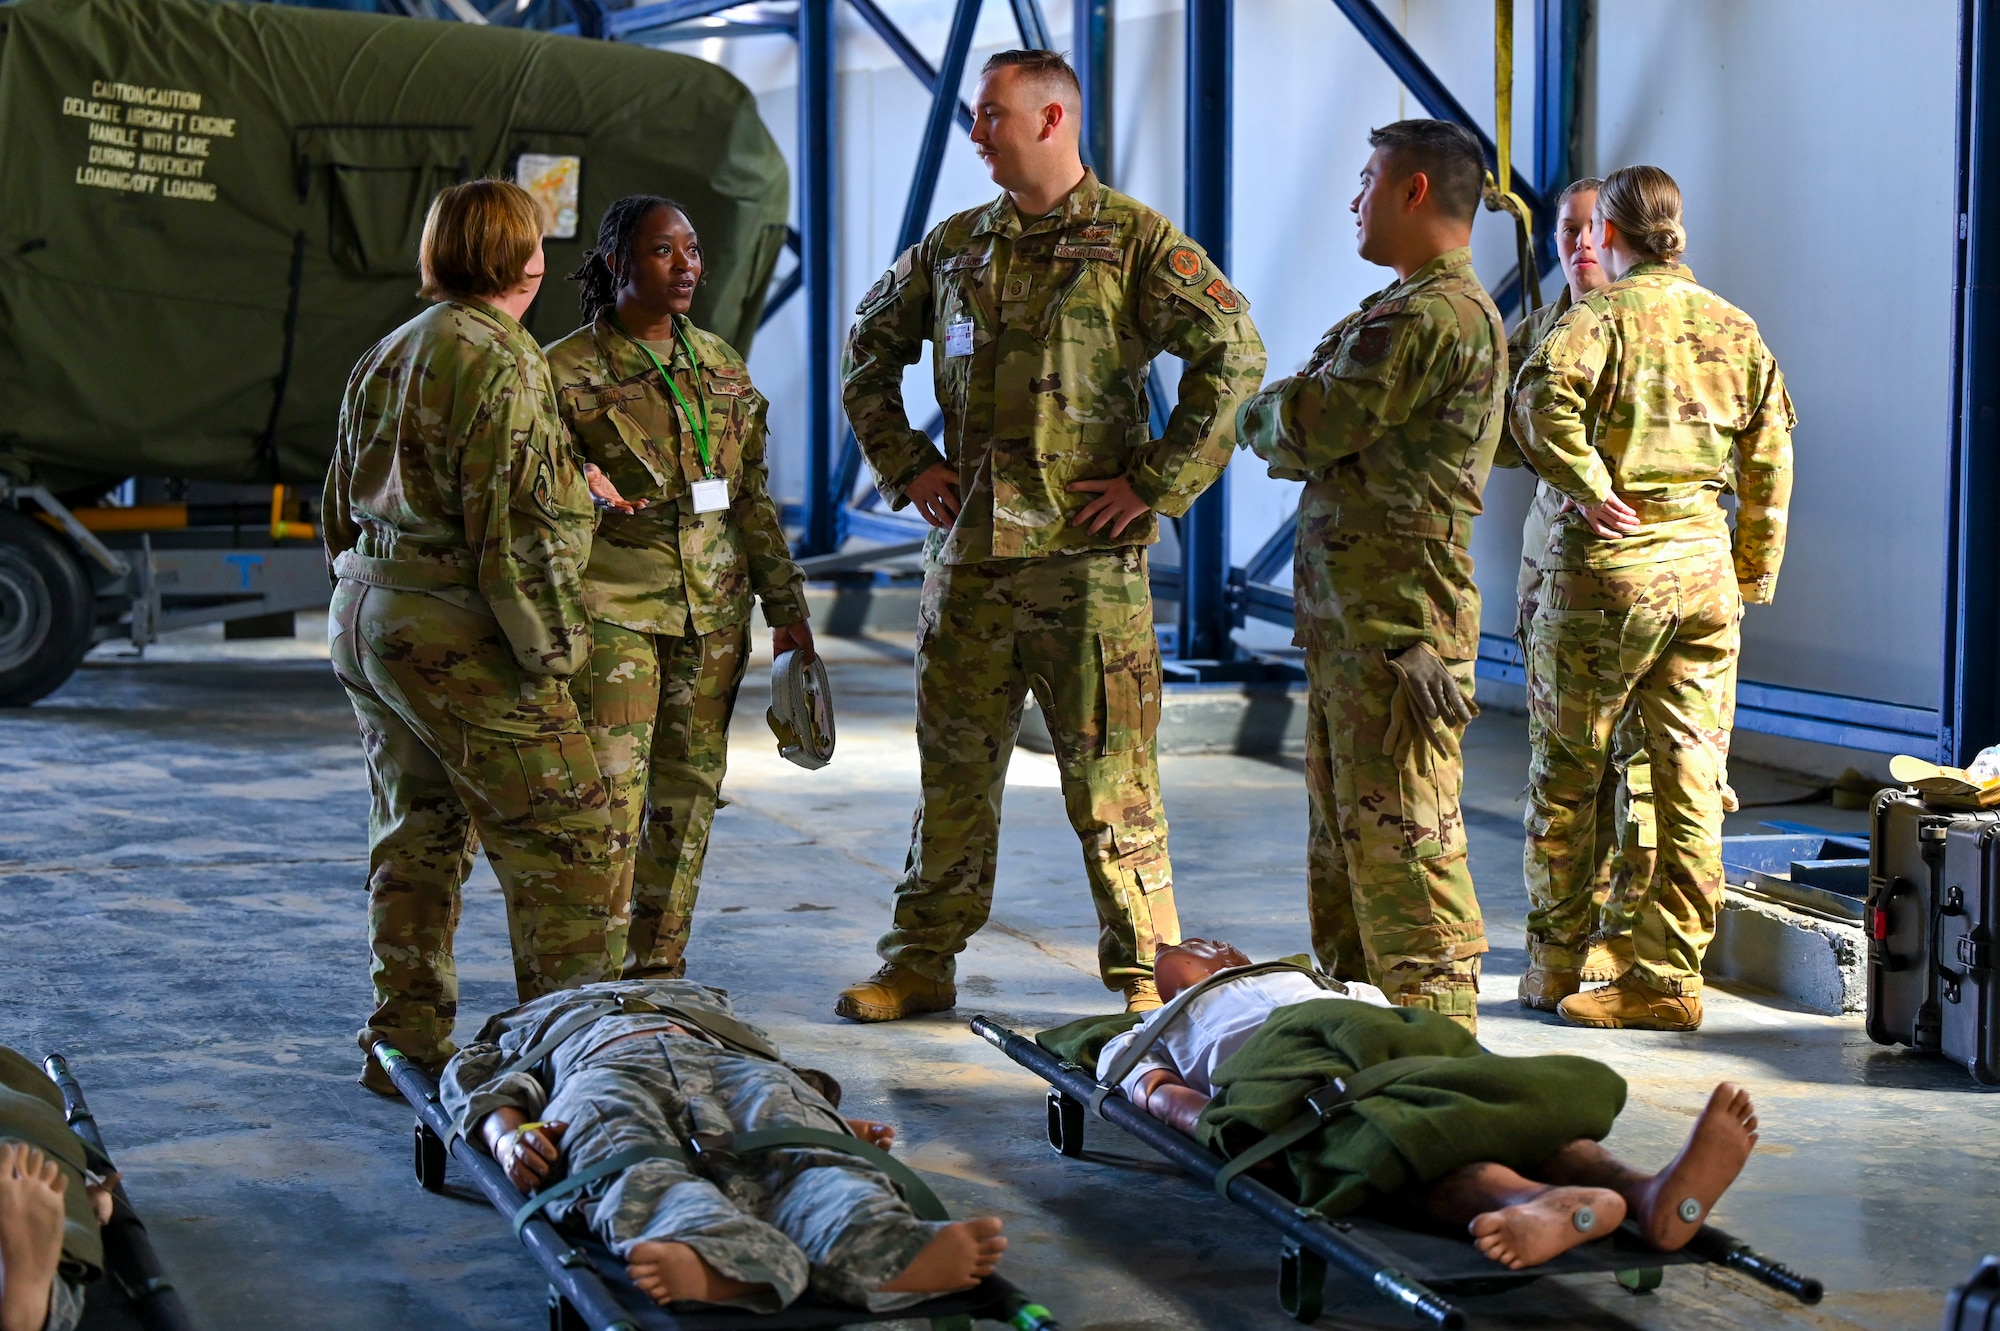 U.S. Air Force aeromedical evacuators assigned to Ramstein Air Force Base’s 86th Aeromedical Evacuation Squadron, determine where to set up their equipment during exercise African Lion 2024 (AL24) at Kenitra Air Base, Morocco, May 18, 2024. AL24 is U.S. Africa Command’s largest, combined, joint exercise. This year marks the 20th anniversary of U.S. Africa Command’s premier joint exercise led by U.S. Army Southern European Task Force, Africa (SETAF-AF), running from April 19 to May 31 across Ghana, Morocco, Senegal and Tunisia.  (U.S. Air Force photo by Senior Airman Jenna A. Bond)